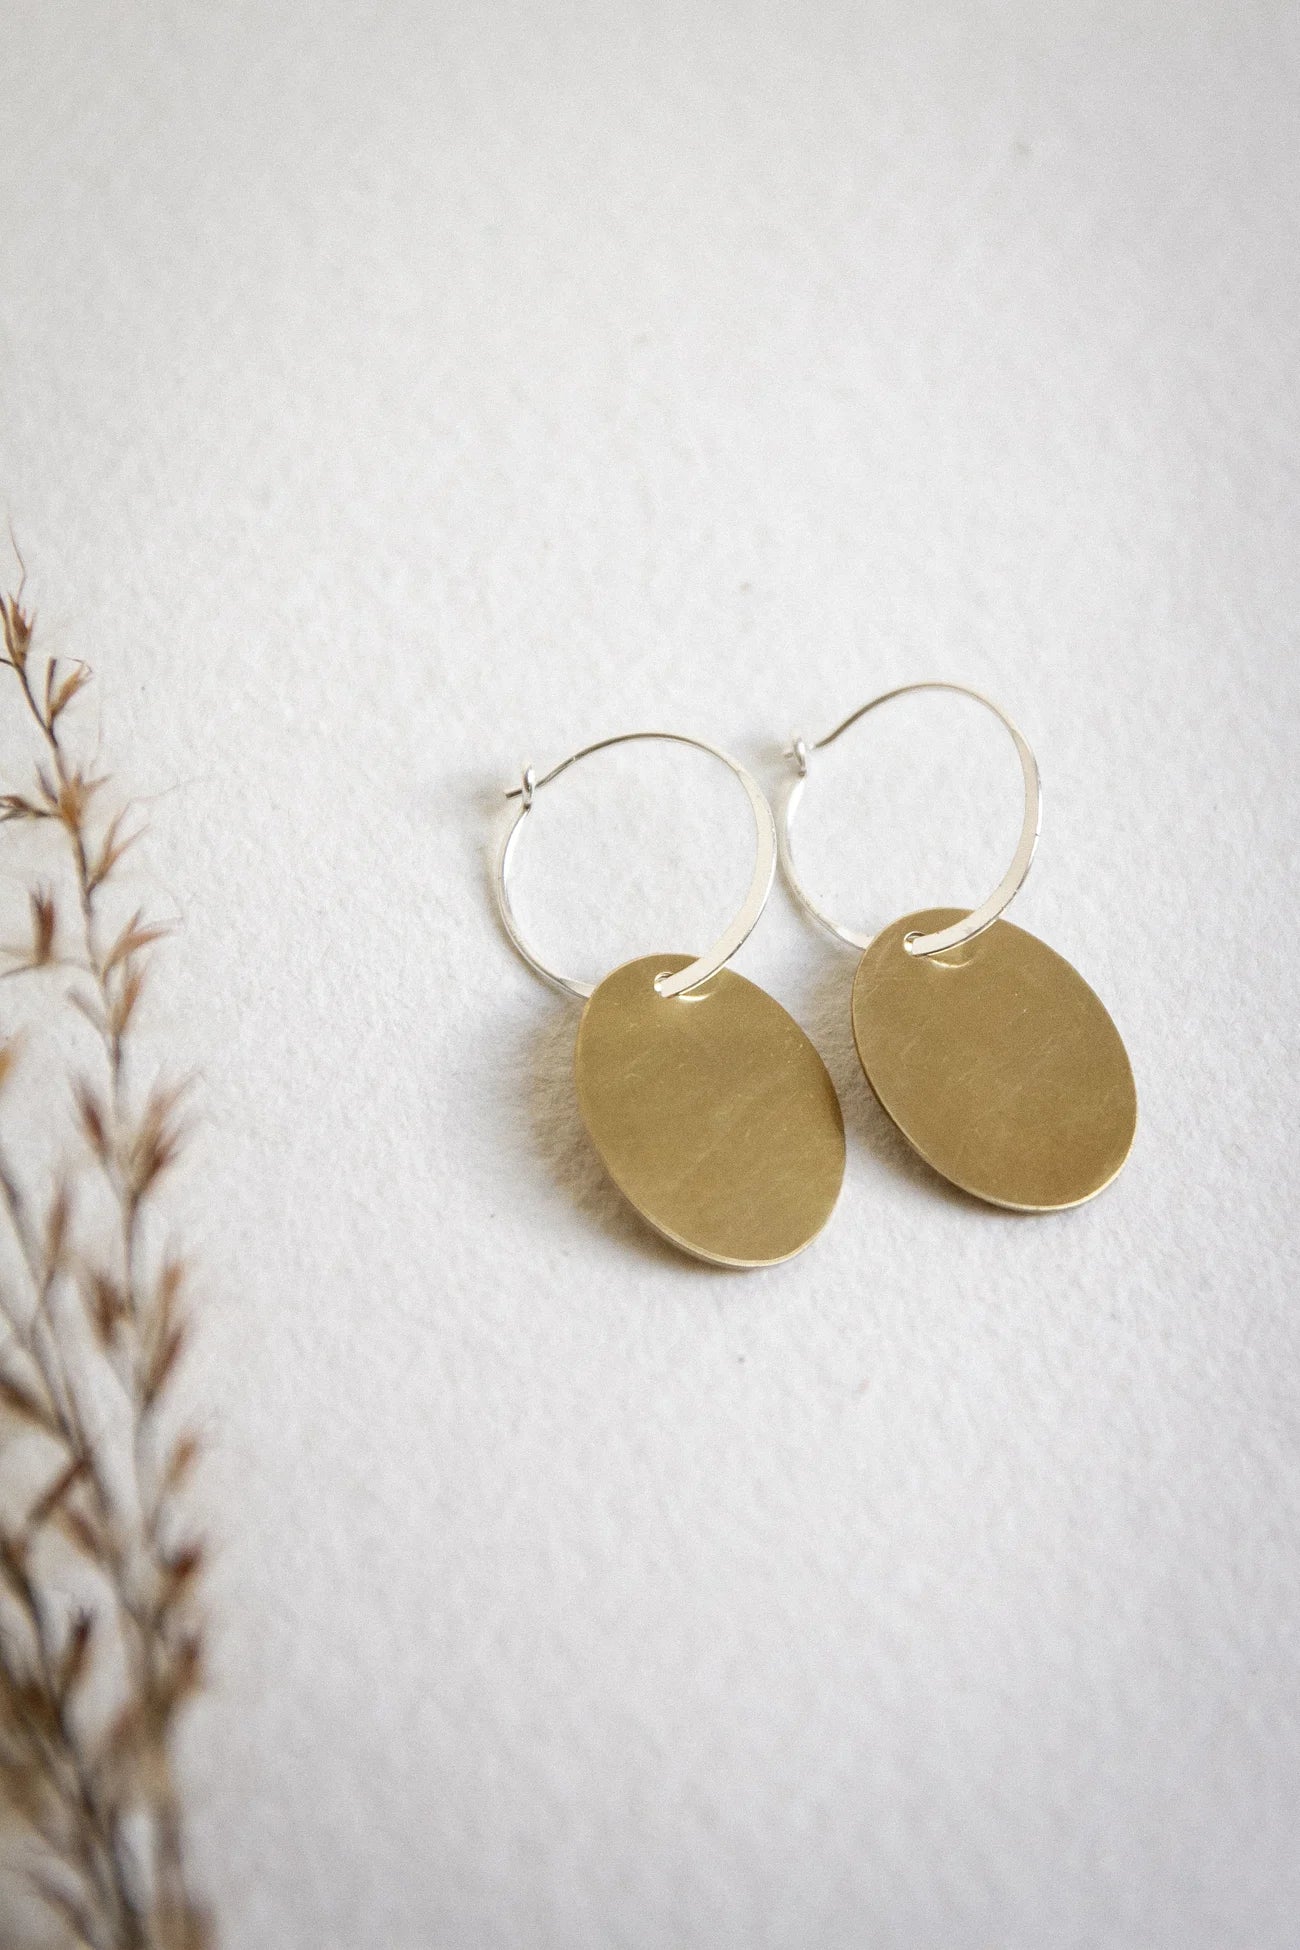 The Every Space handmade recycled brass hoop oval drop earrings with sterling silver hoops by Clare Elizabeth Kilgour